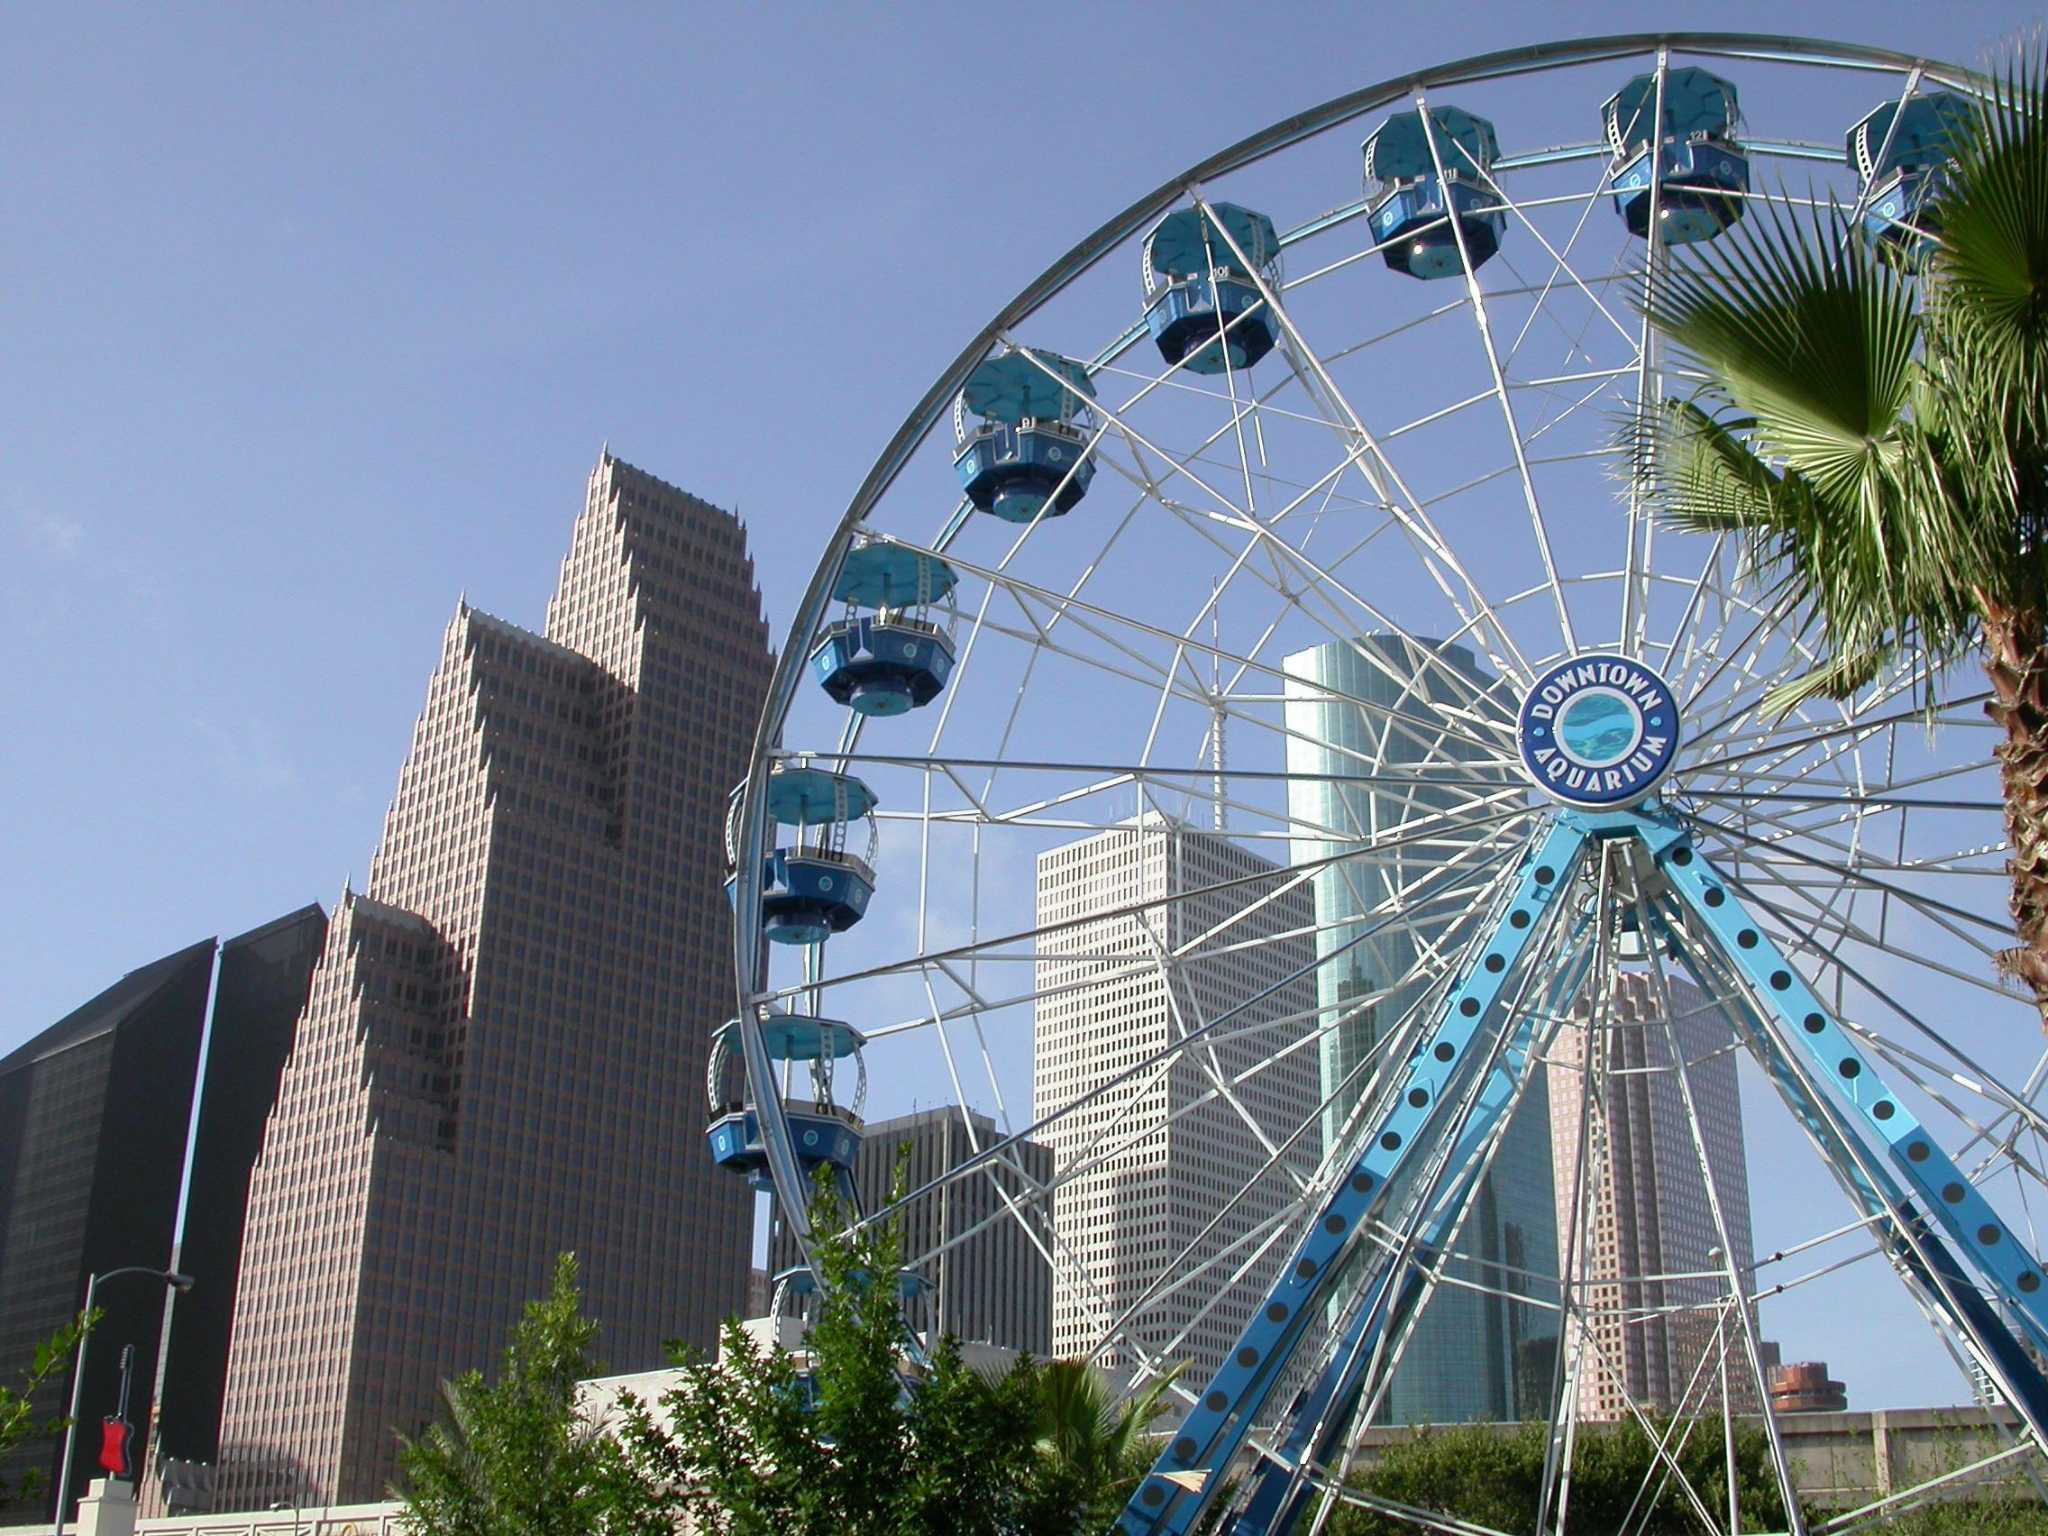 How to spend the day in downtown Houston